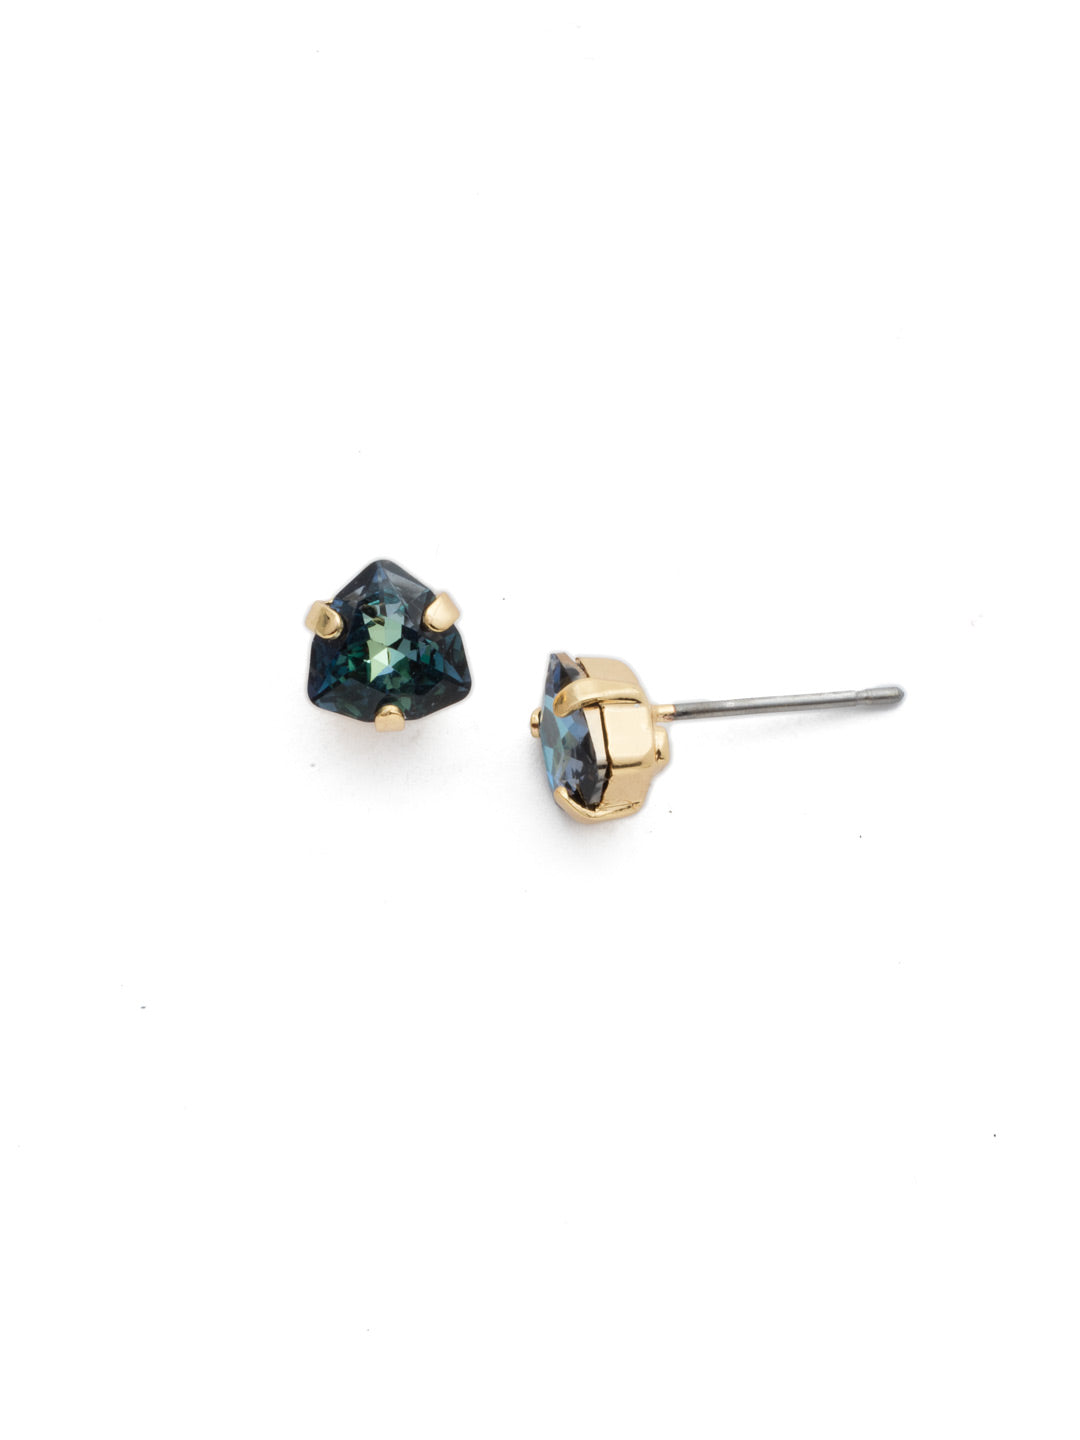 Sedge Stud Earrings - EDX1BGCSM - A shield shaped crystal in a simple pronged setting. Perfect if you want to add just a bit of sparkle to any outfit! From Sorrelli's Cashmere collection in our Bright Gold-tone finish.